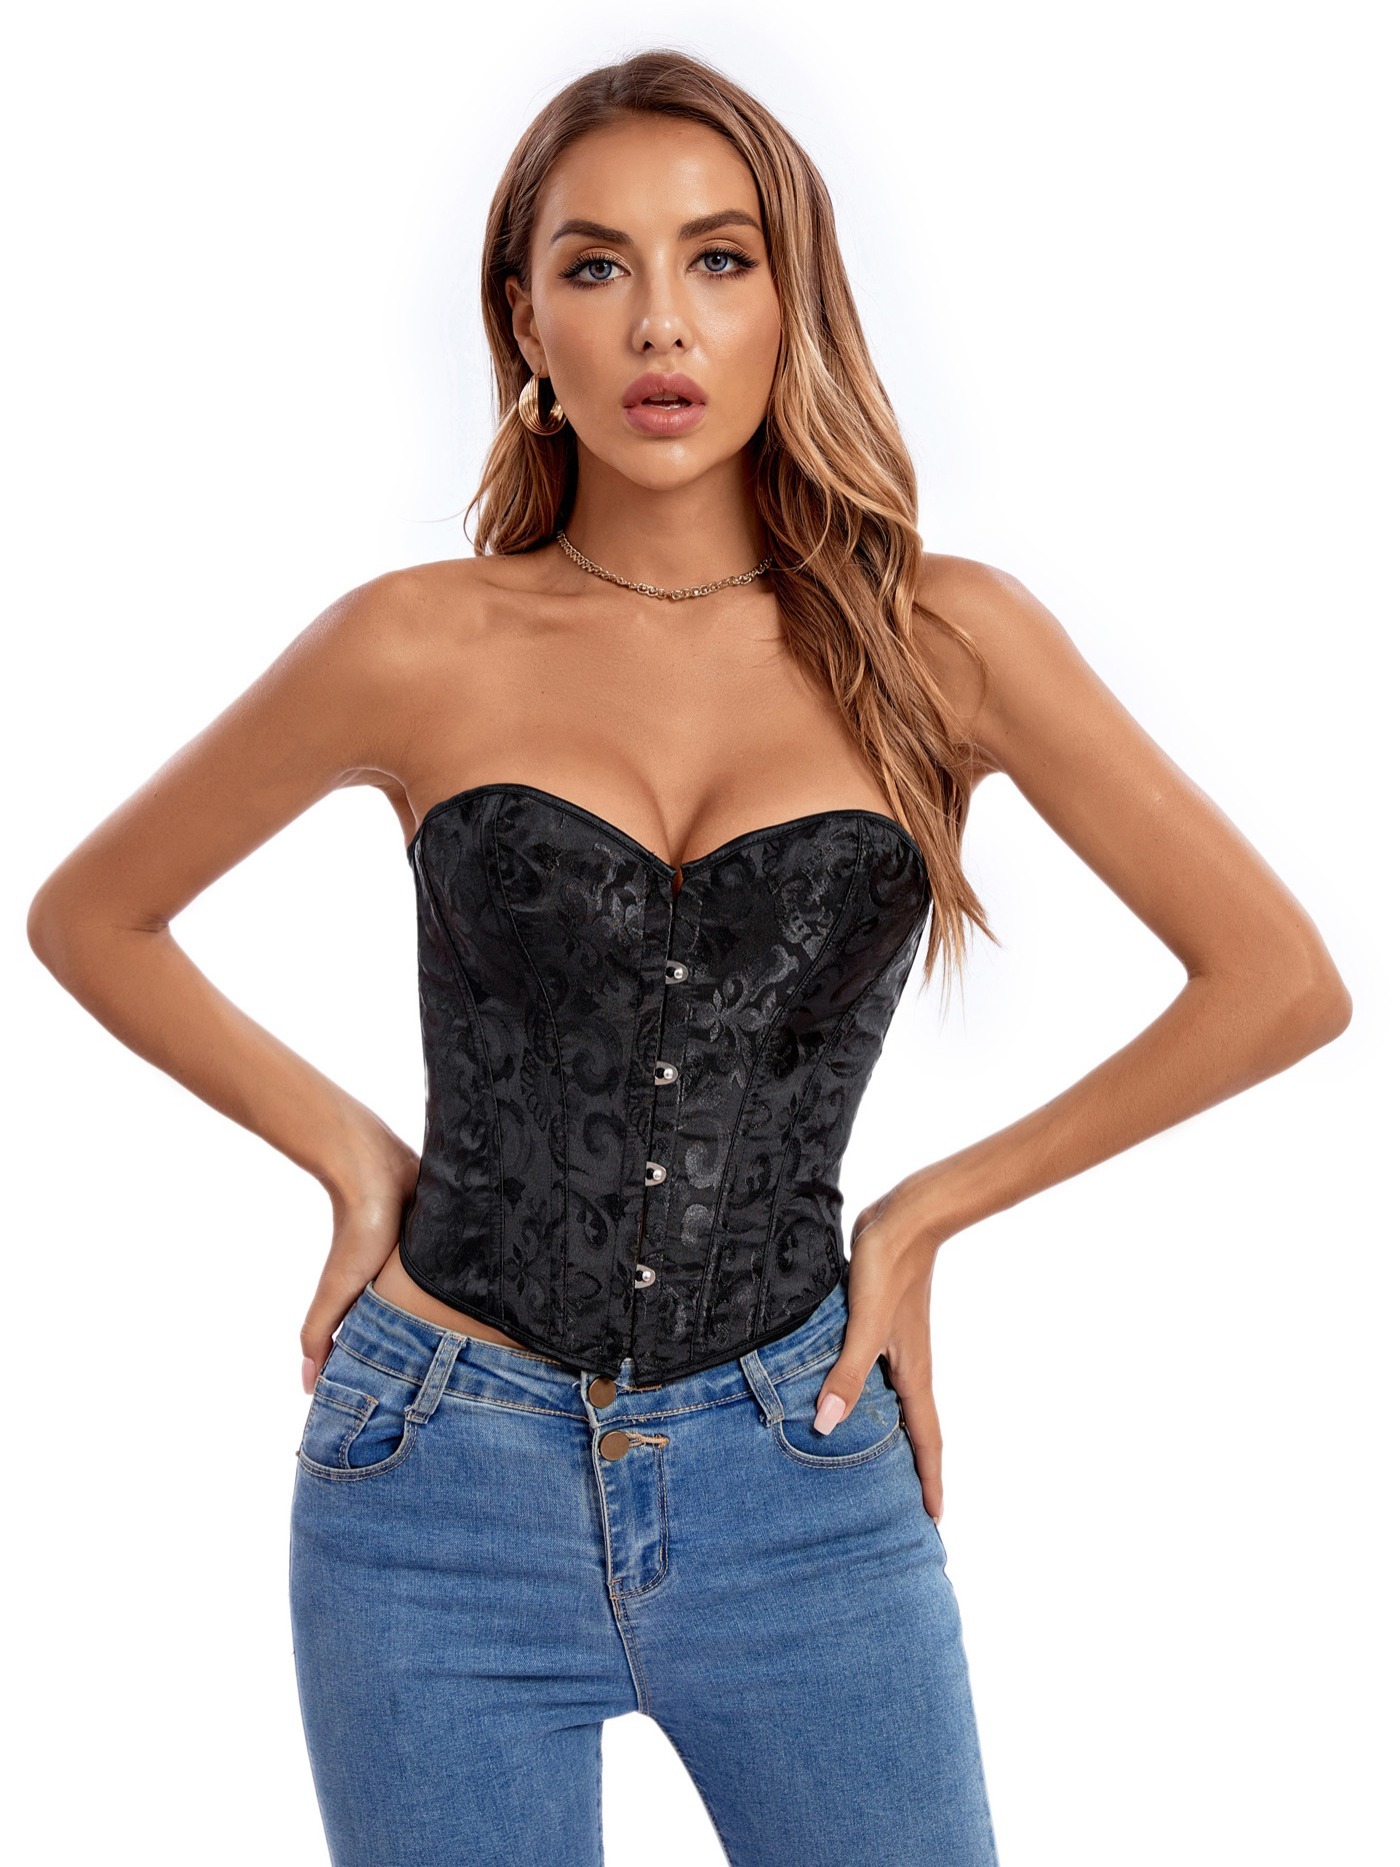 Lace Up Corset Tube Top, Stylish Bustier Bodice Strapless Carnival Costume,  Women's Clothing